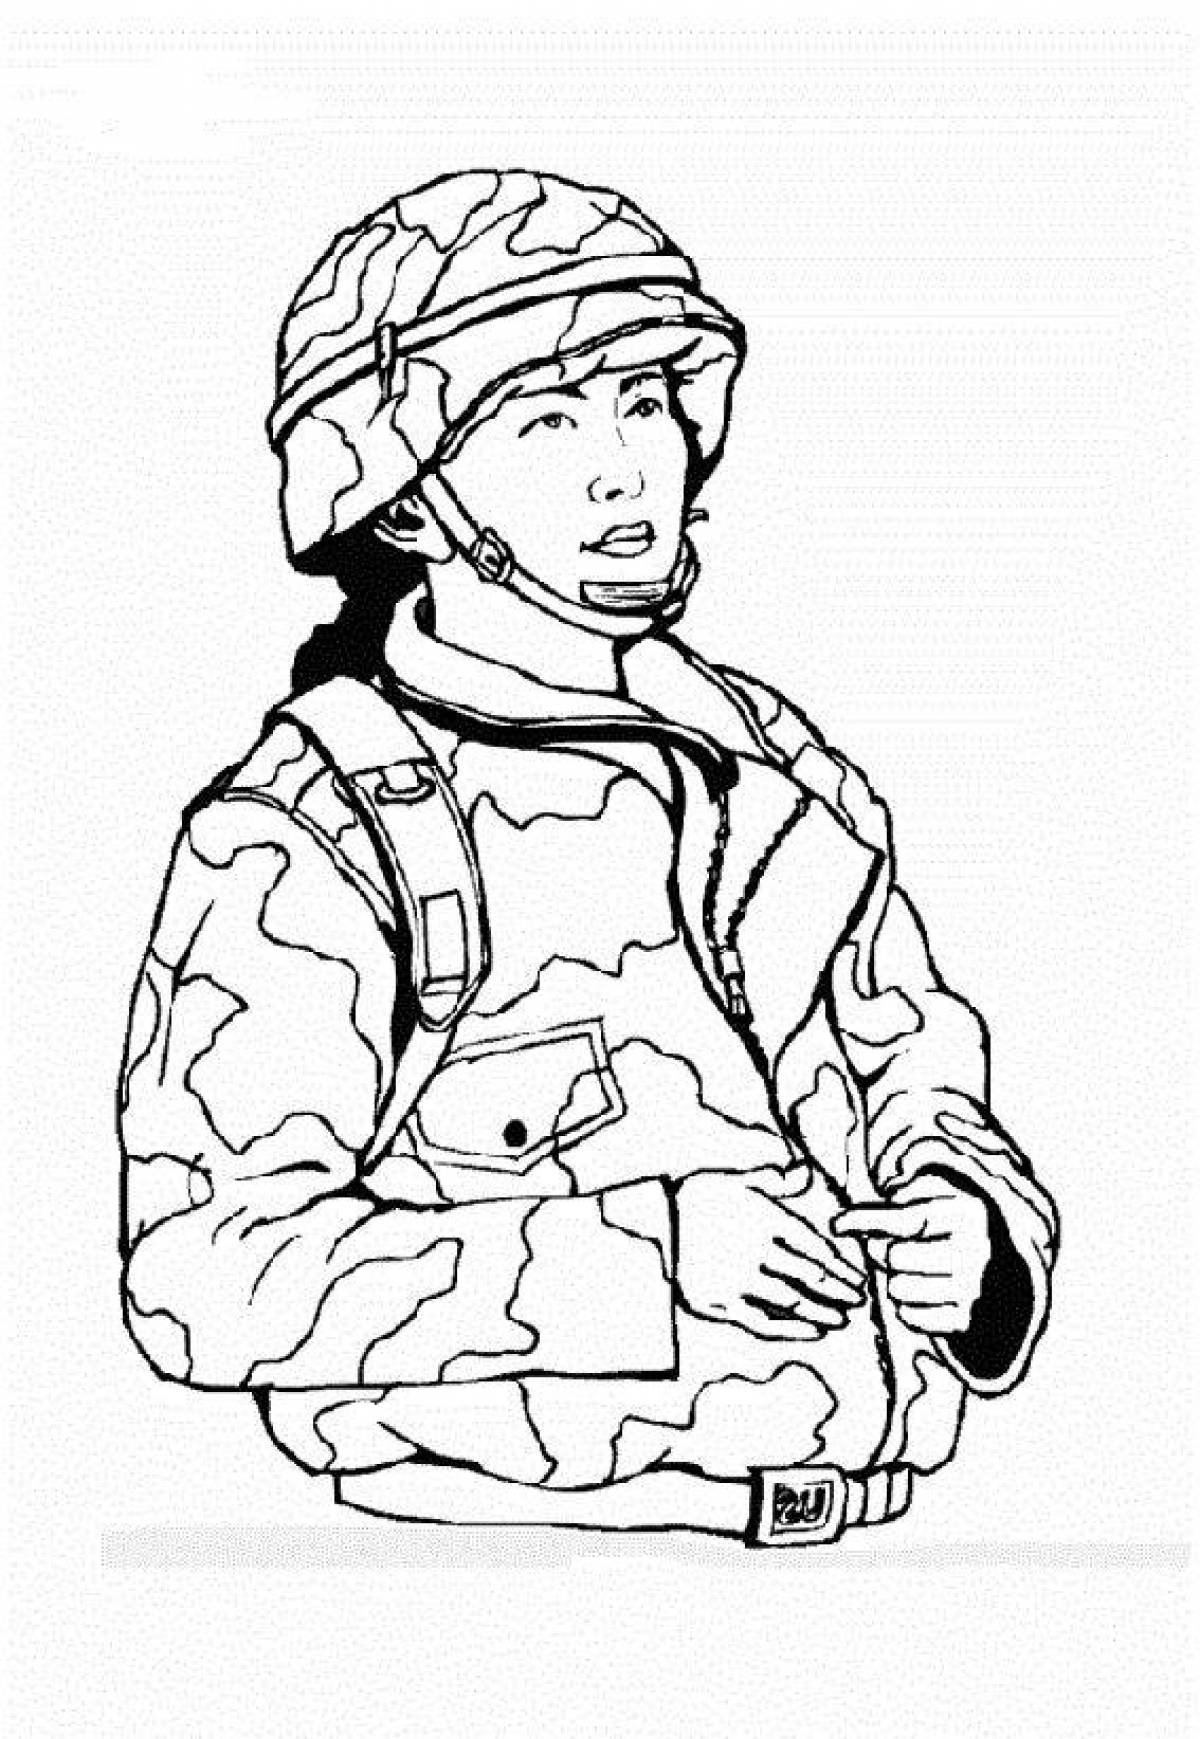 Coloring pages military soldiers